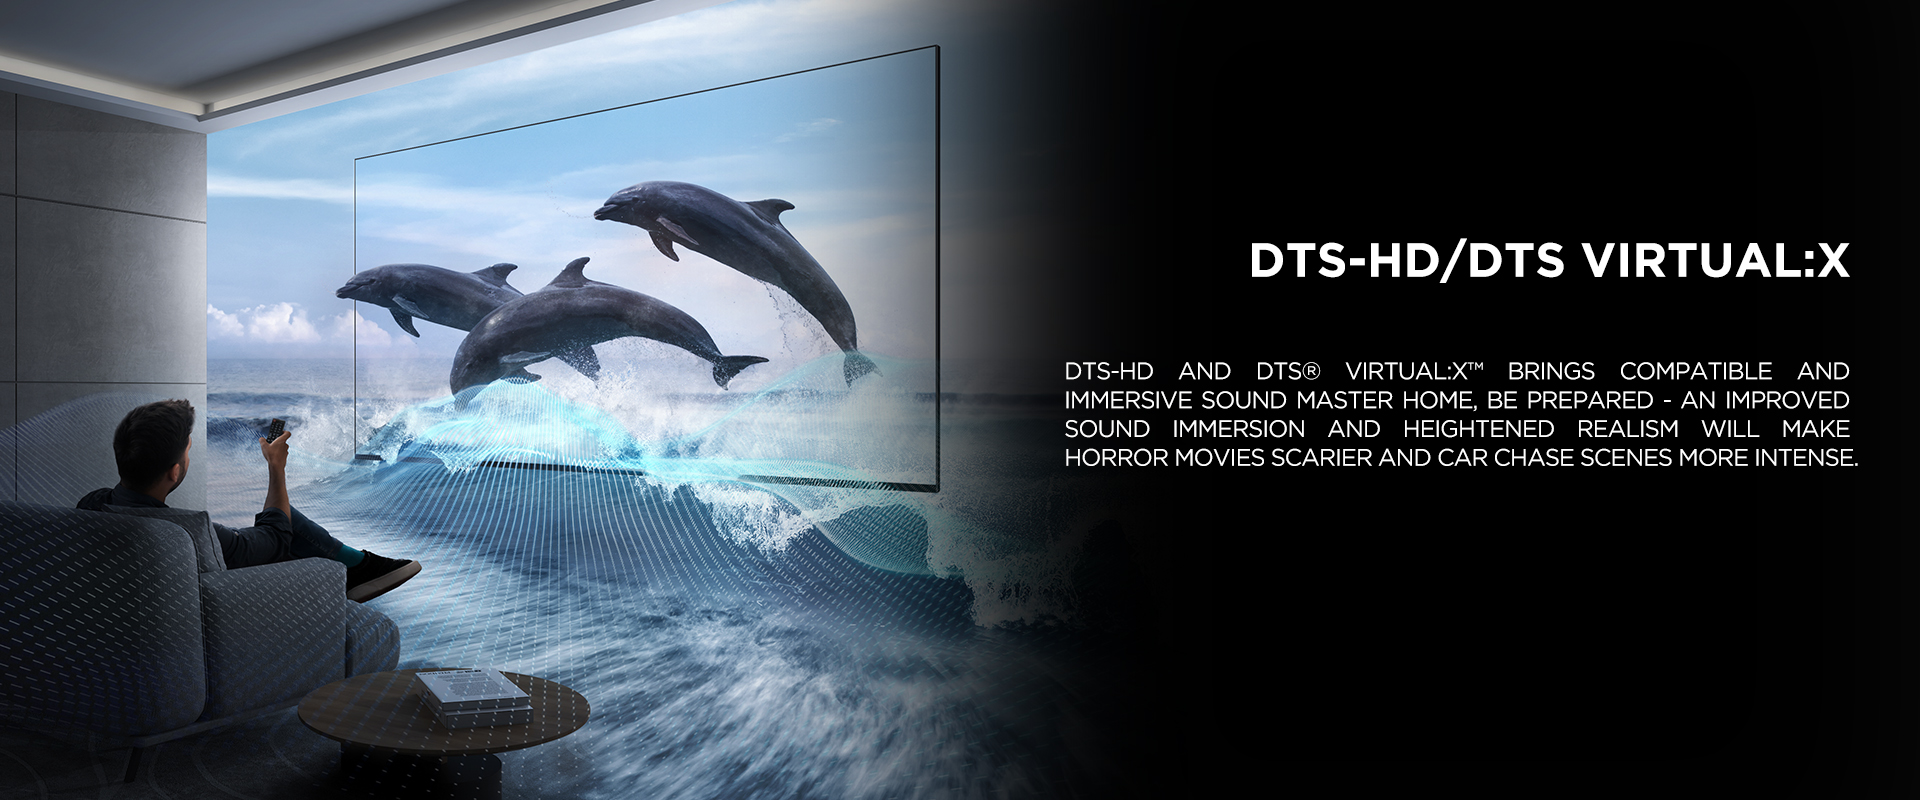 DTS-HD/DTS Virtual:X - DTS-HD and DTS® VIRTUAL:X™ brings compatible and immersive sound master home, be prepared - an improved sound immersion and heightened realism will make horror movies scarier and car chase scenes more intense.
